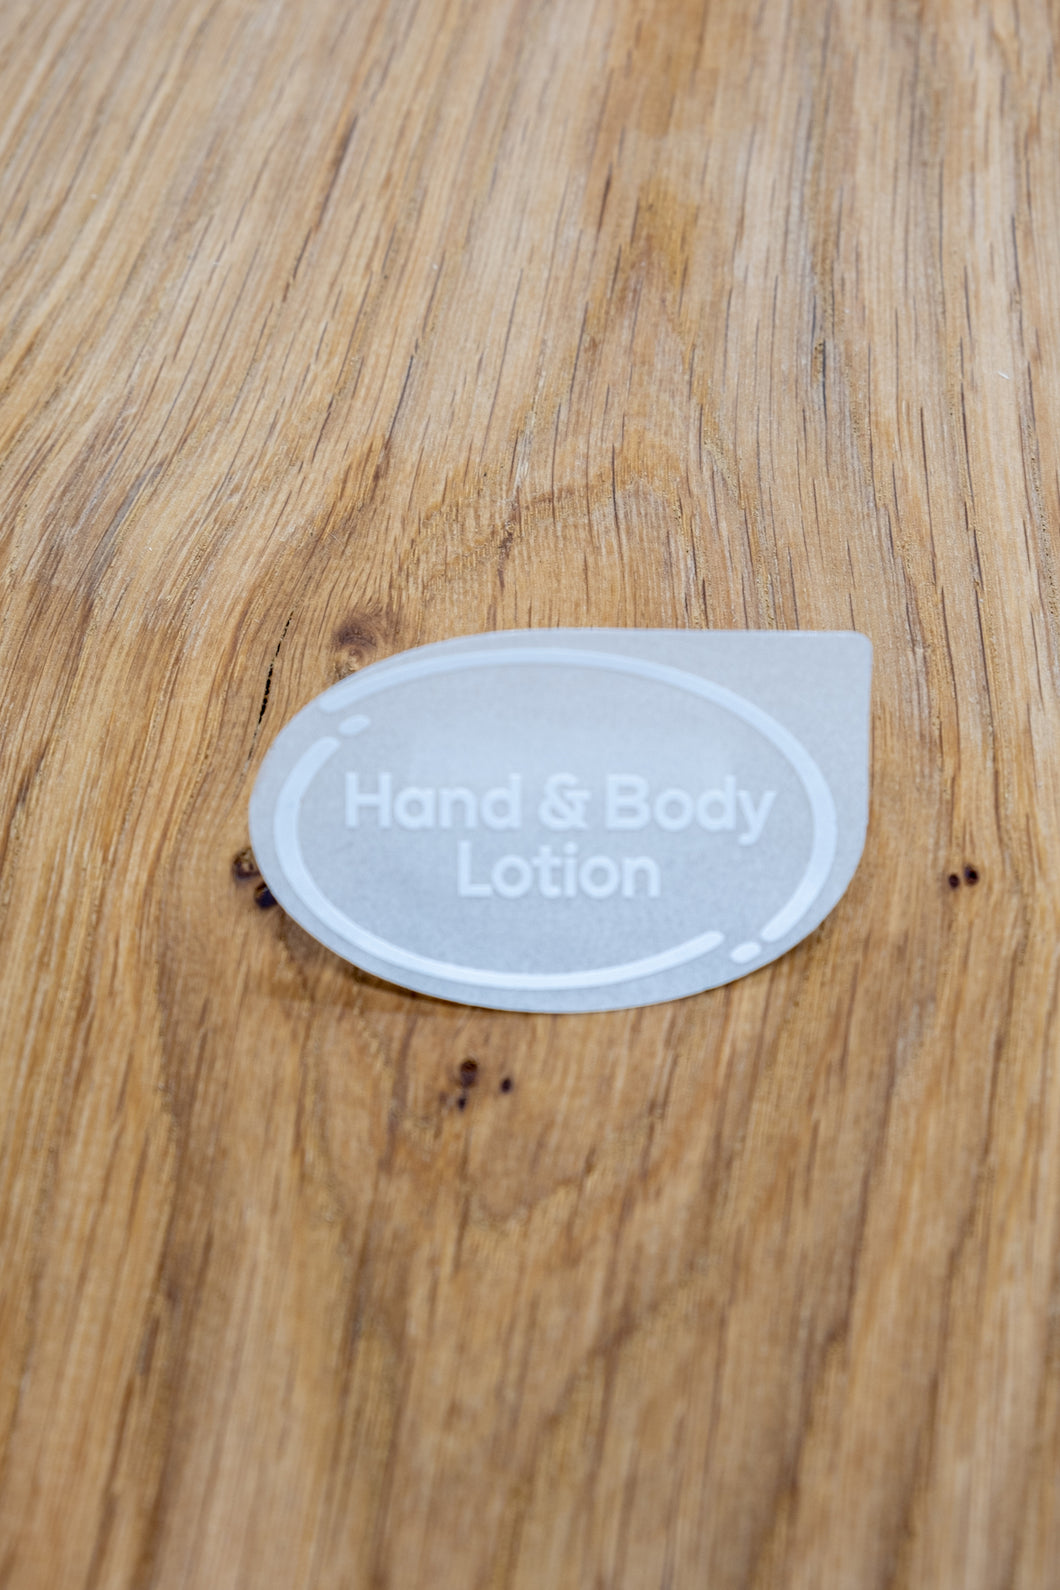 Hand & Body Lotion Label